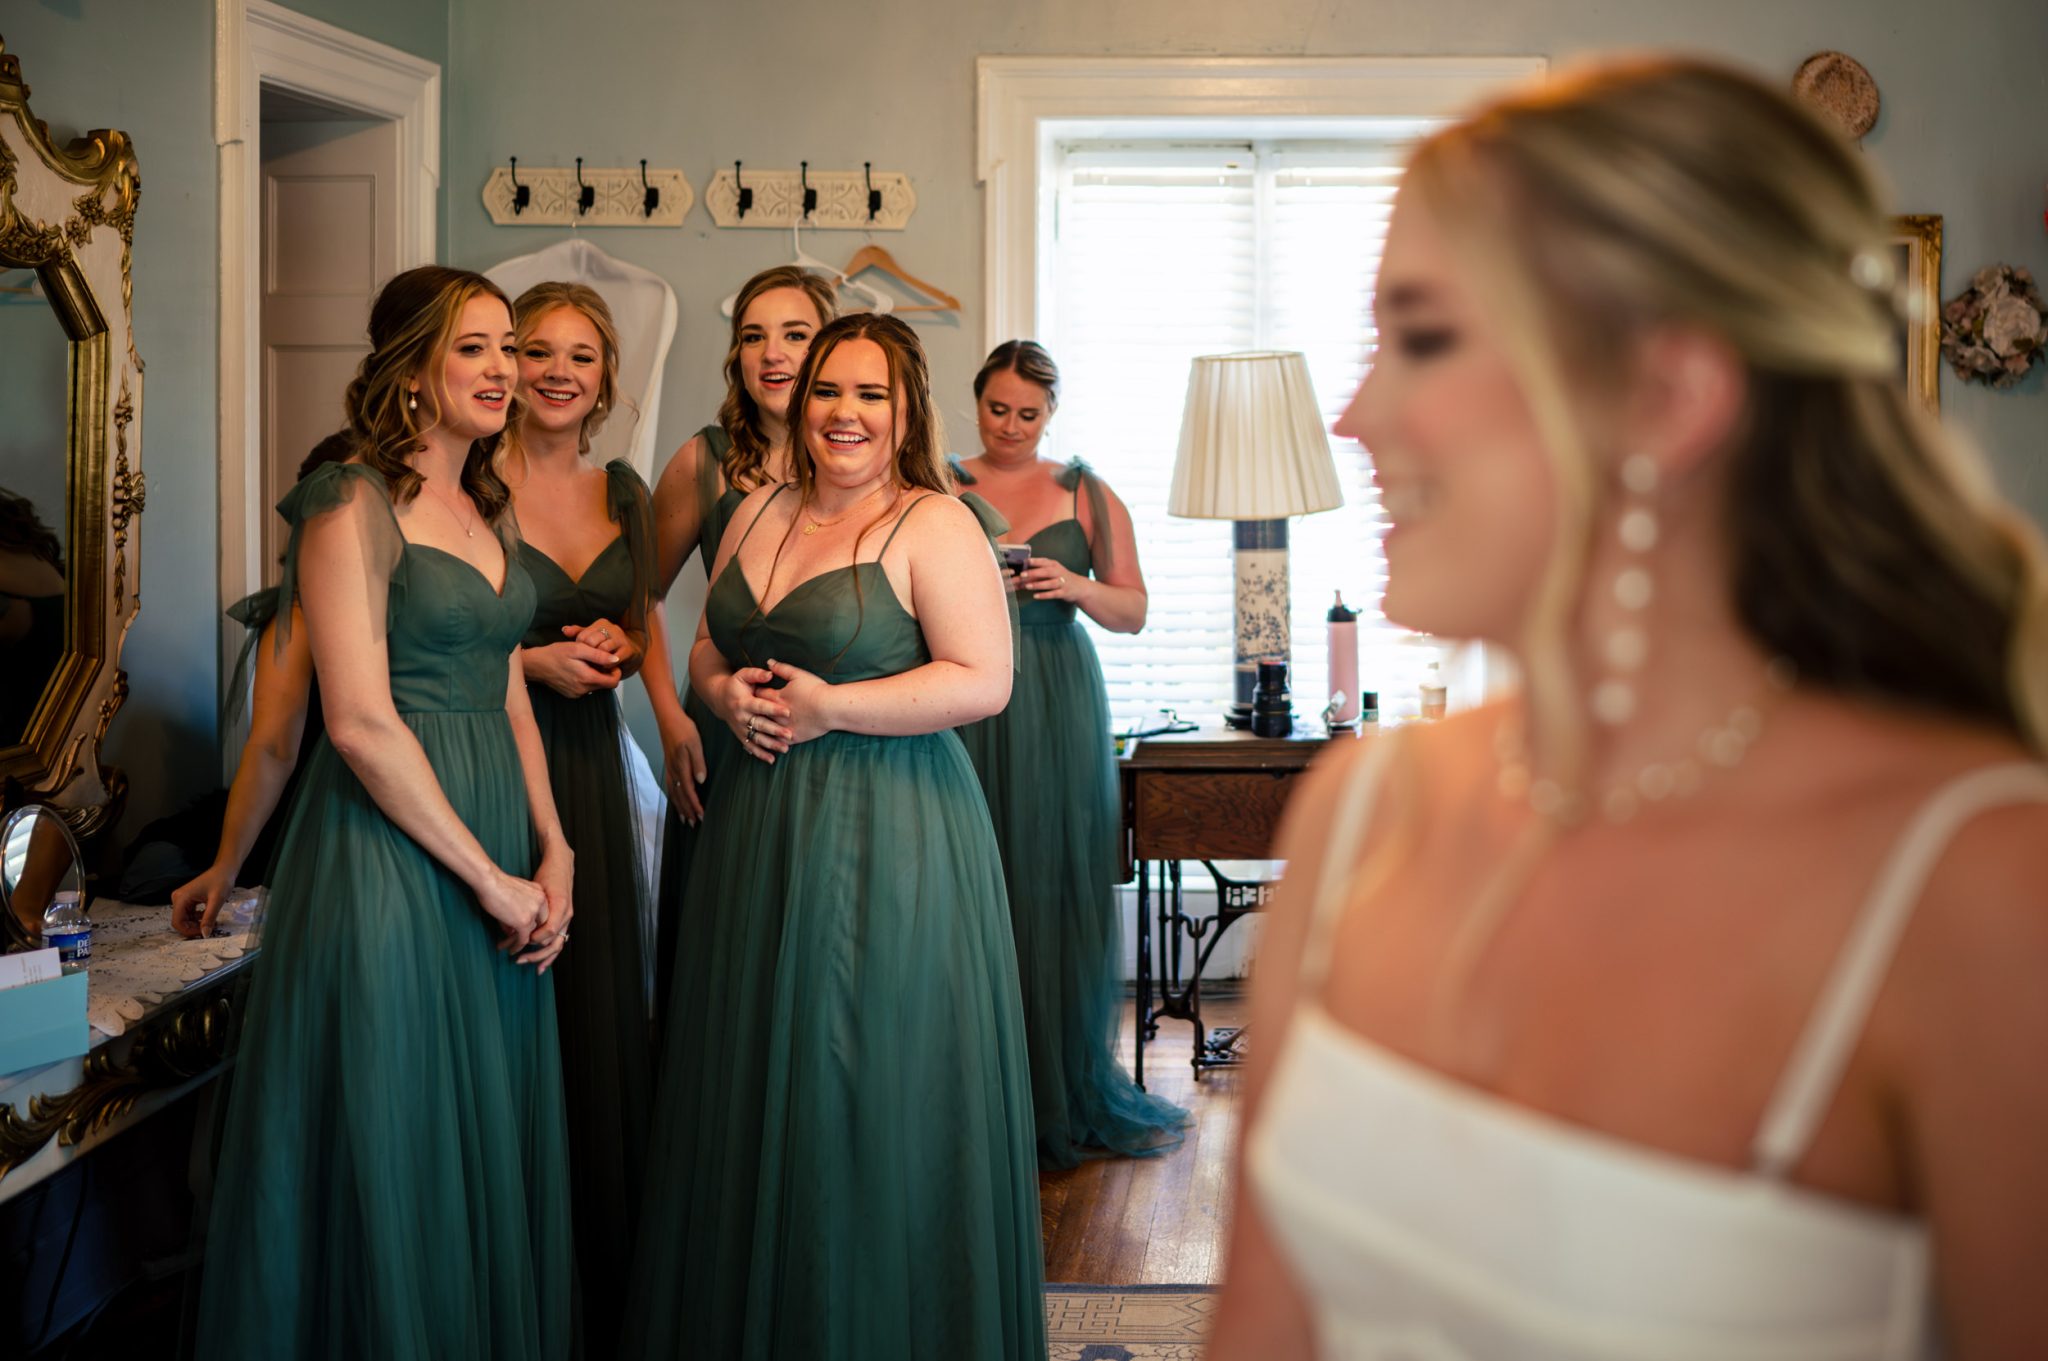 A bride and her bridesmaids are getting ready in a room.